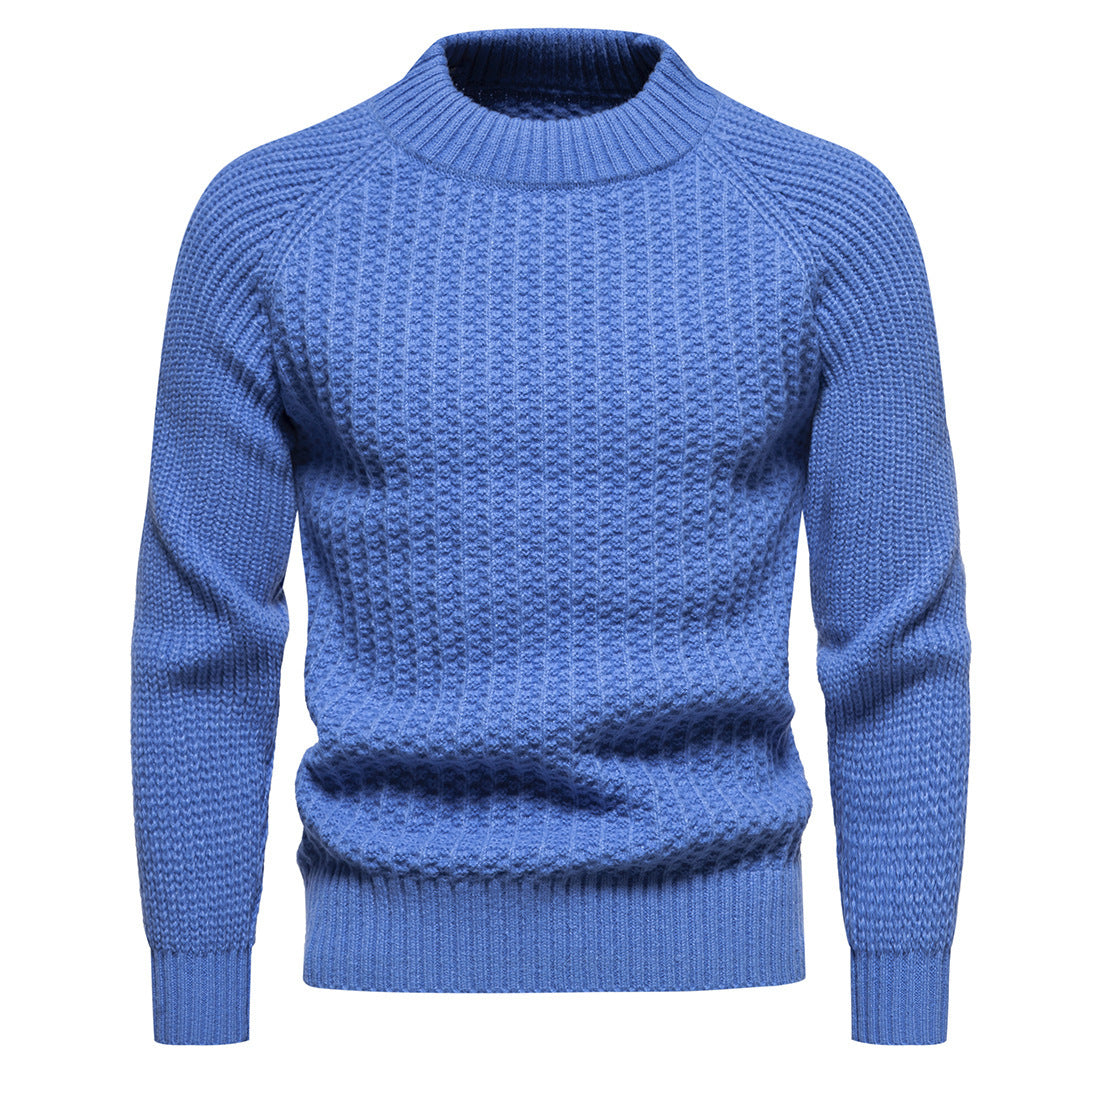 Men's Casual Loose Solid Color Round Neck Sweater